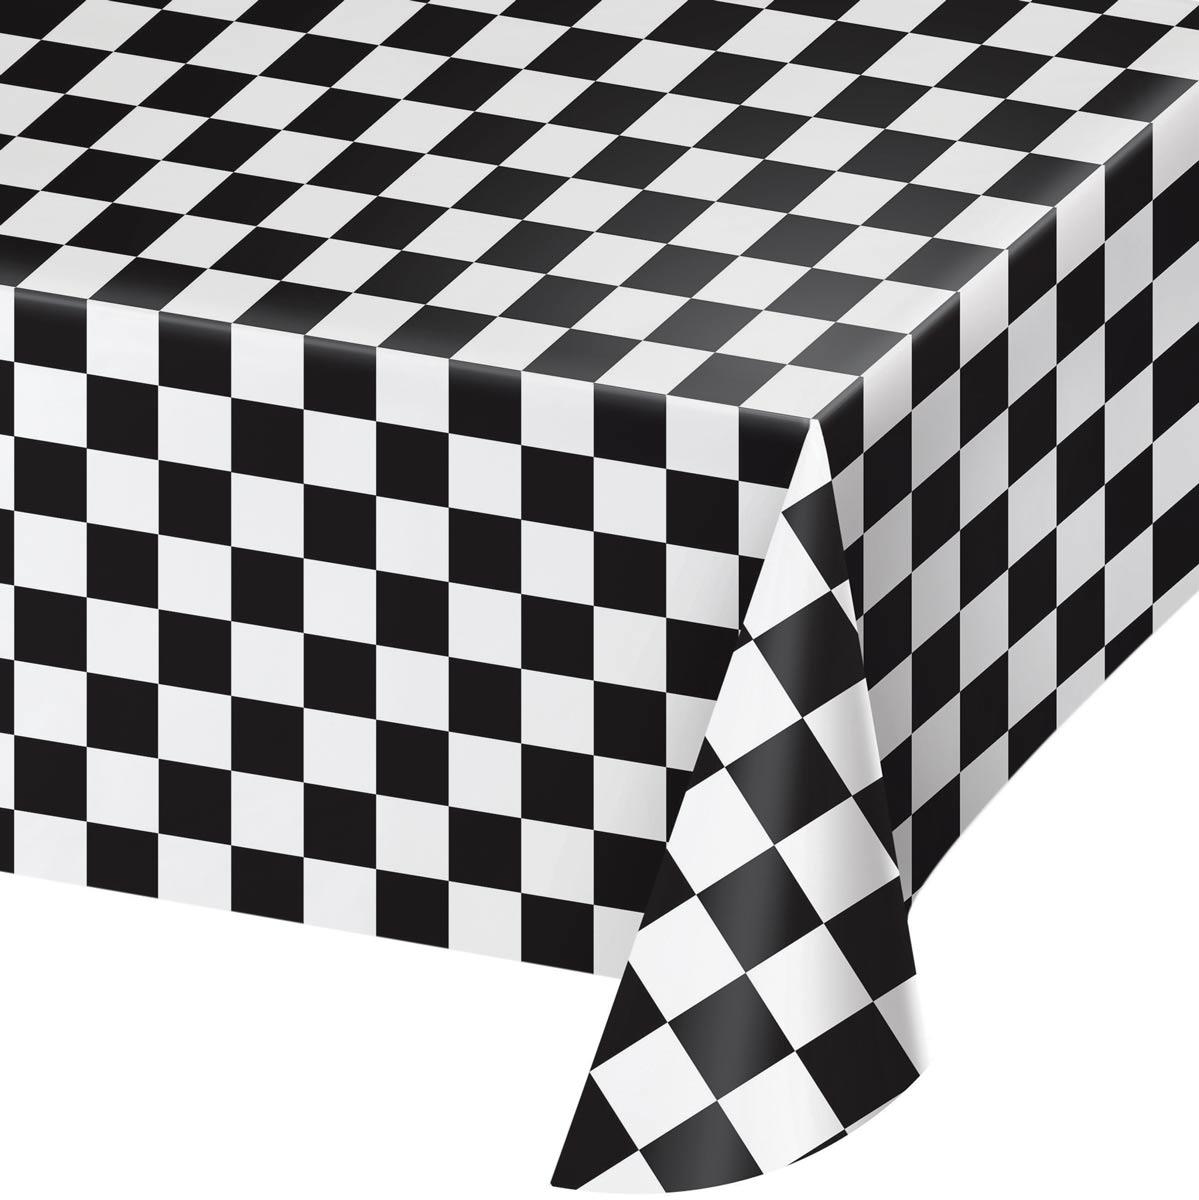 Grand Prix Black and White Plastic Tablecover measuring 54" x 108" by Creative Party 39197 and available in the UK here at Karnival Costumes online party shop